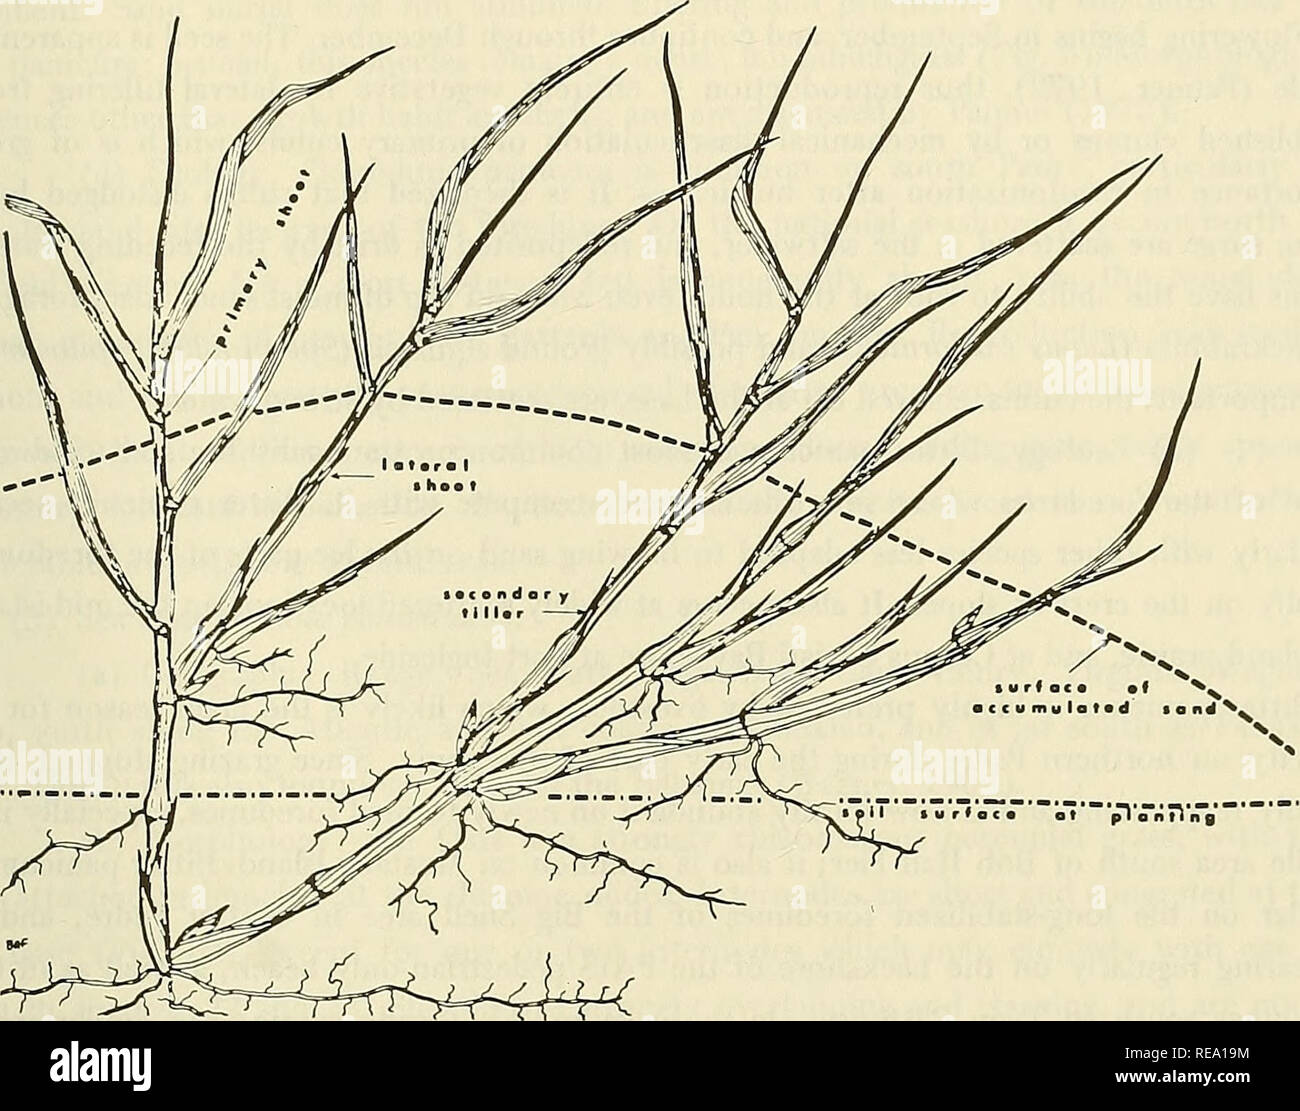 . Construction and stabilization of coastal foredunes with vegetation, Padre Island, Texas. Shore protection; Barrier islands; Grasses; Sand dunes. Figure 21. Bitter panicum growth at end of first summer. Lateral growth is shown in one direction only. Initial transplant has grown vertically and horizontally, accompanied by sand accumulation. Lateral shoot is buried, has rooted, and lias formed a tiller and new buds. Primary tiller has given rise to secondary tillers wliich are in turn forming new tillers at the buried nodes. 65. Please note that these images are extracted from scanned page ima Stock Photo